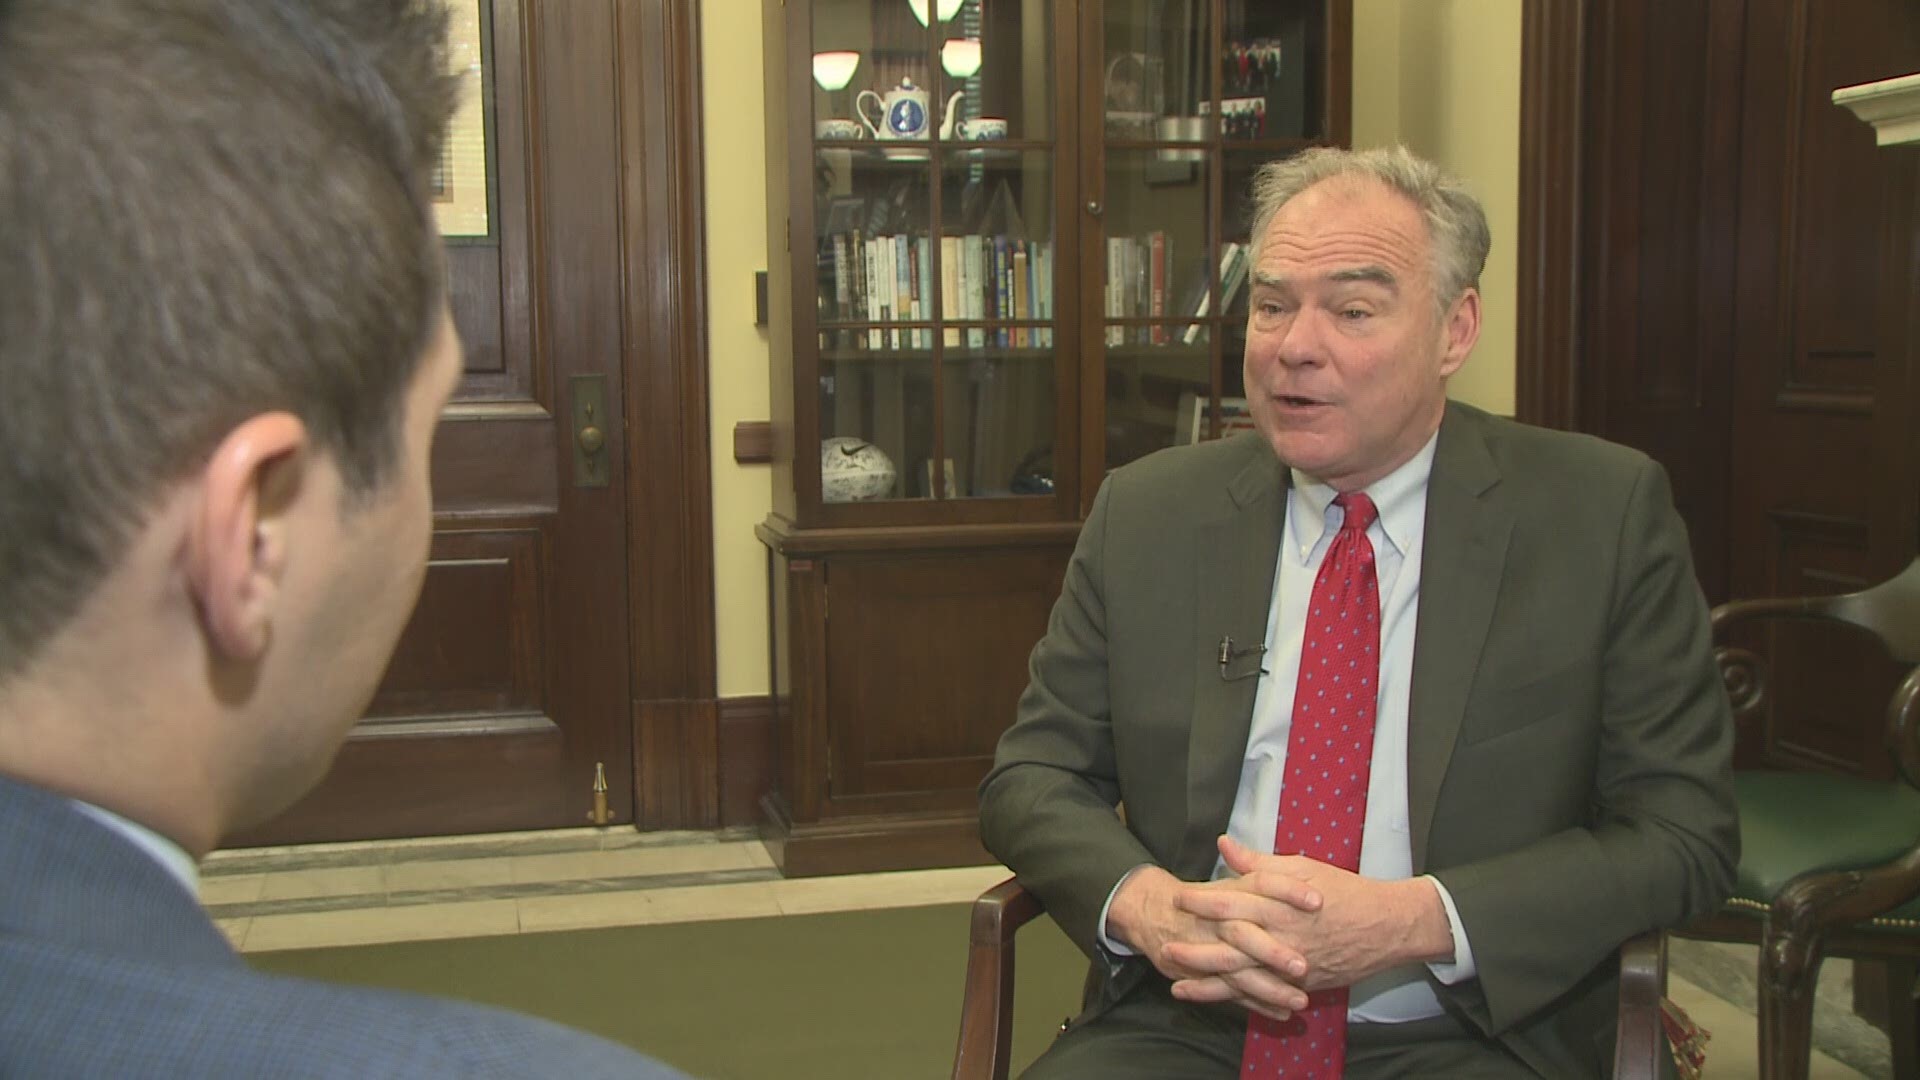 Kaine says he attributes much of the blame for rising tensions on President Trump's 'Maximum Pressure' campaign.